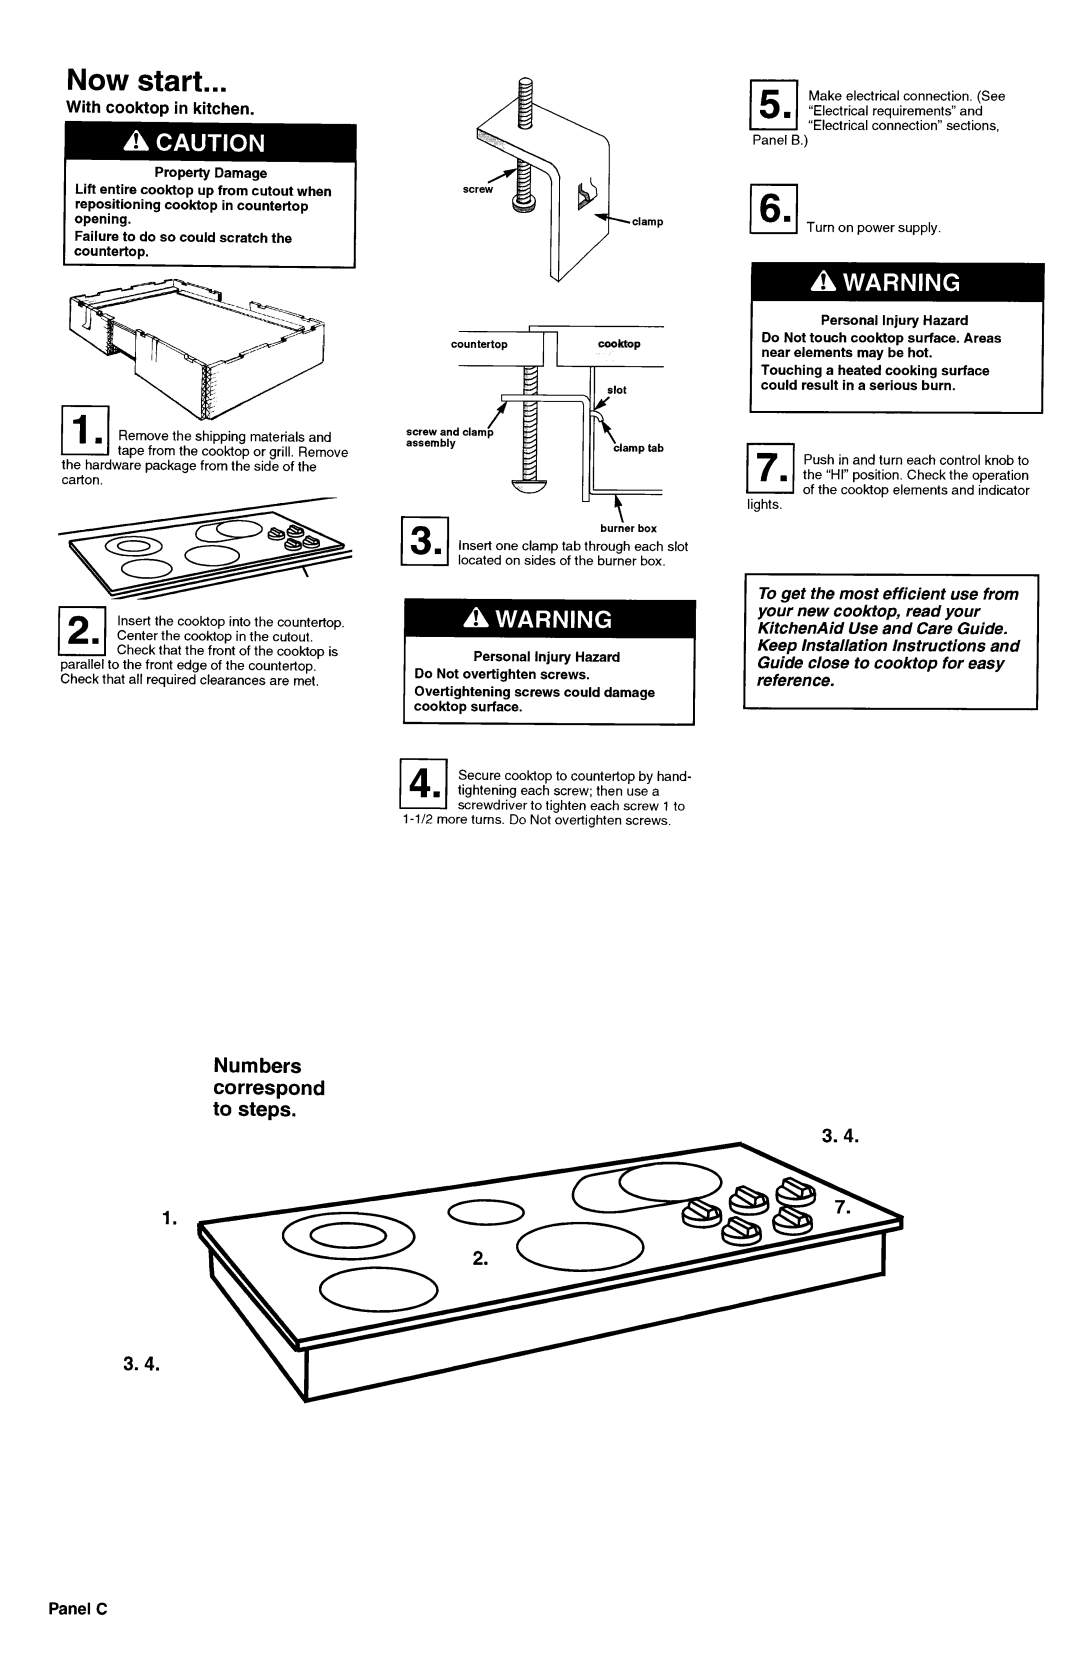 KitchenAid 4366501 installation instructions Now start, With cooktop in kitchen, Panel C, Numbers correspond to steps 